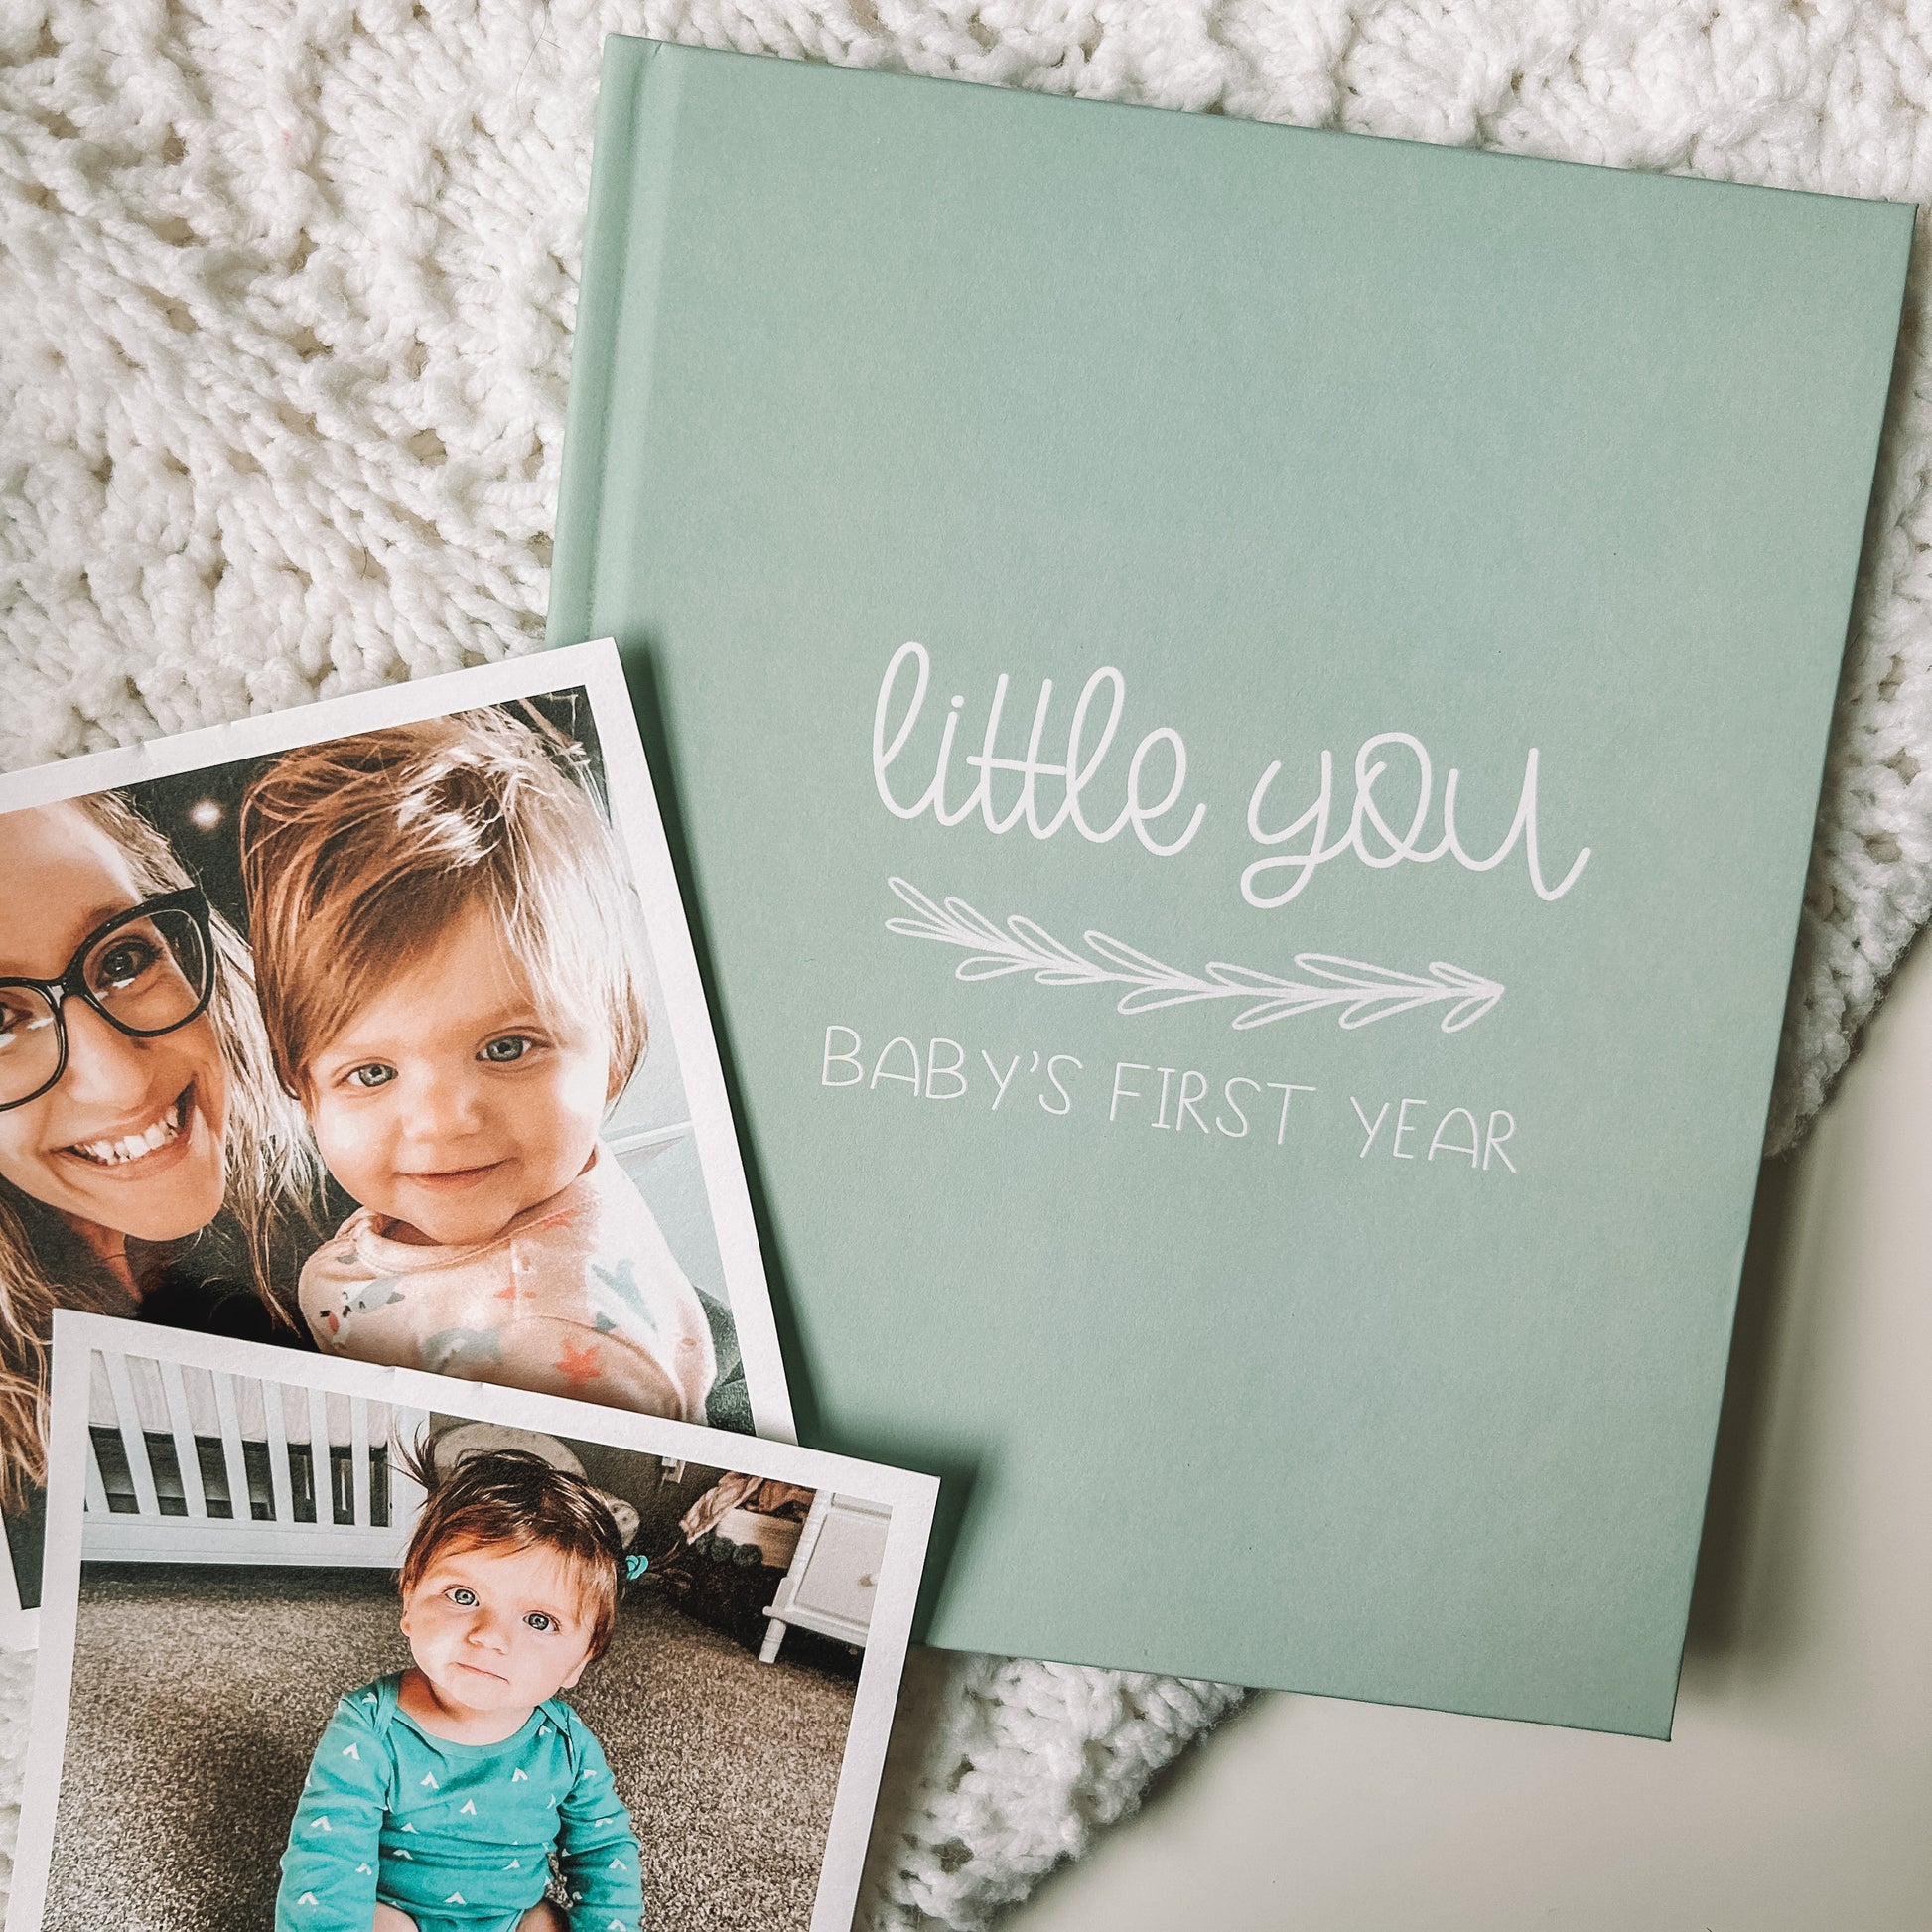 Keepsake baby book with a green cover titled Little You Baby's First Year in white text.